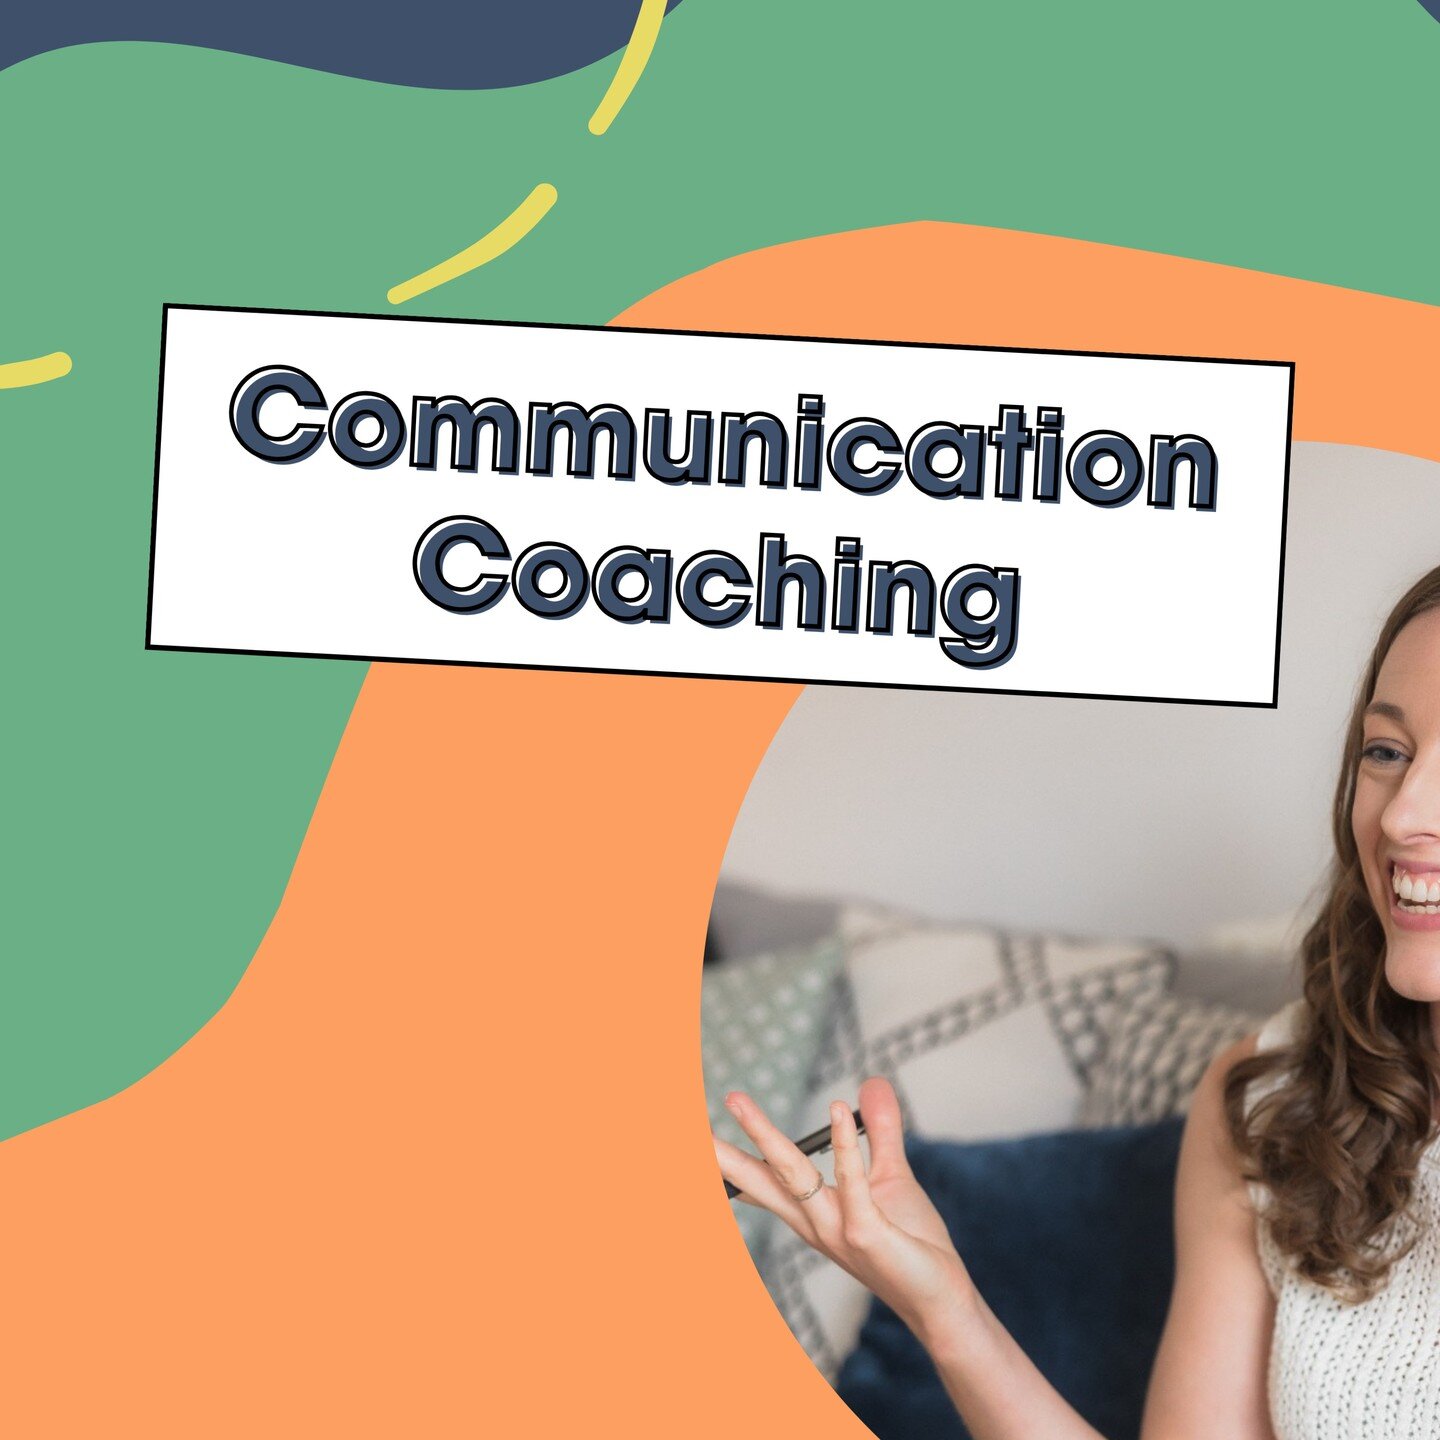 ✨ Communication Coaching ✨

Do you ever feel like communication is holding you back in some way from living the life you want?

Communication is one of our most valuable tools for connecting with others. It is at the heart of all our interactions &nd